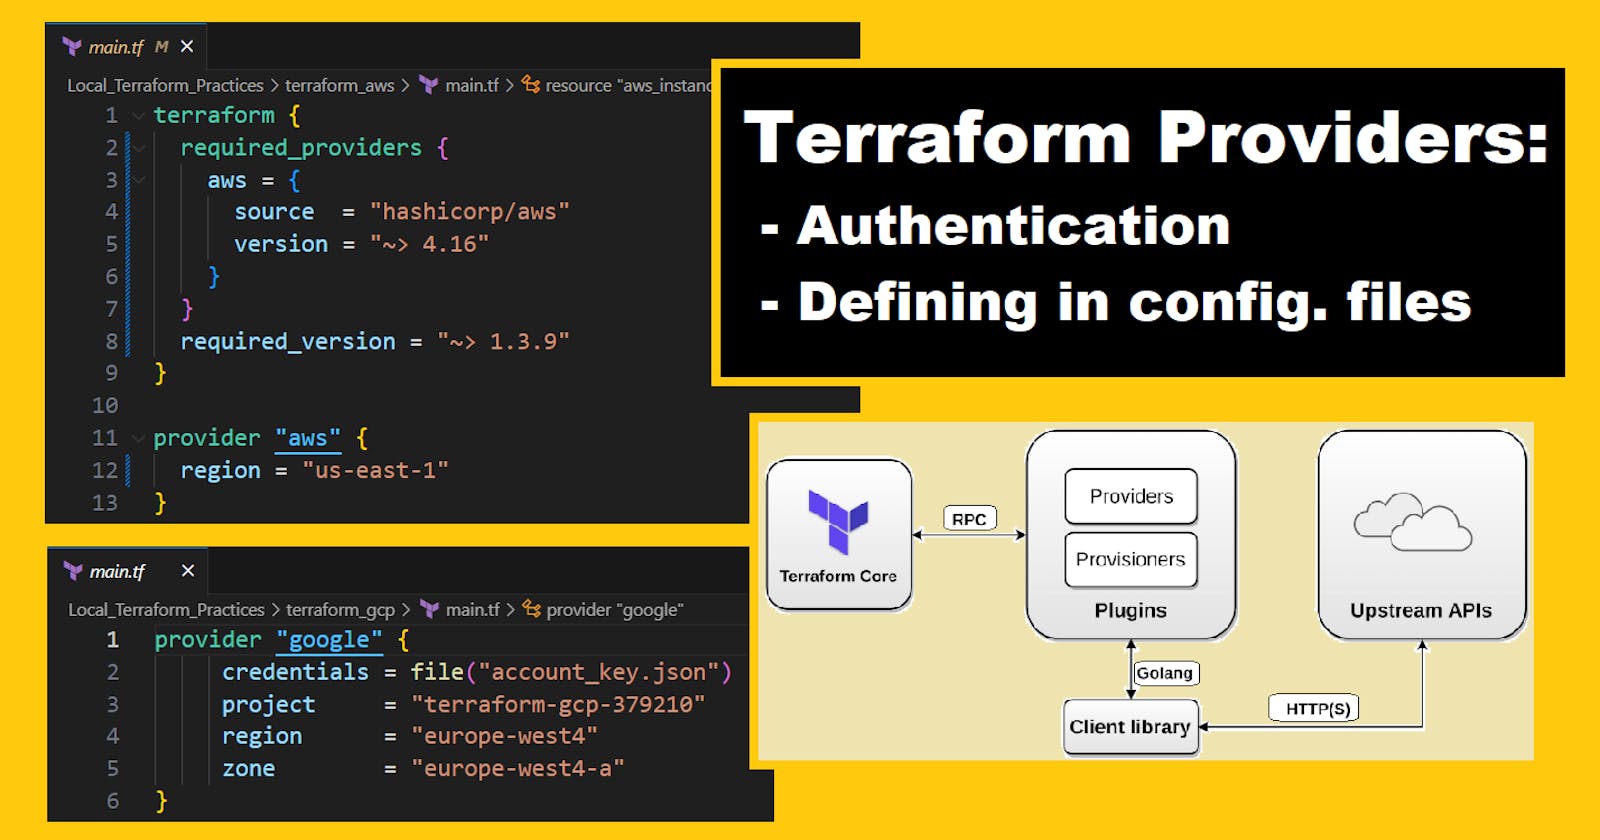 Terraform Providers: Authenticate and Configure To Deploy Your Resources